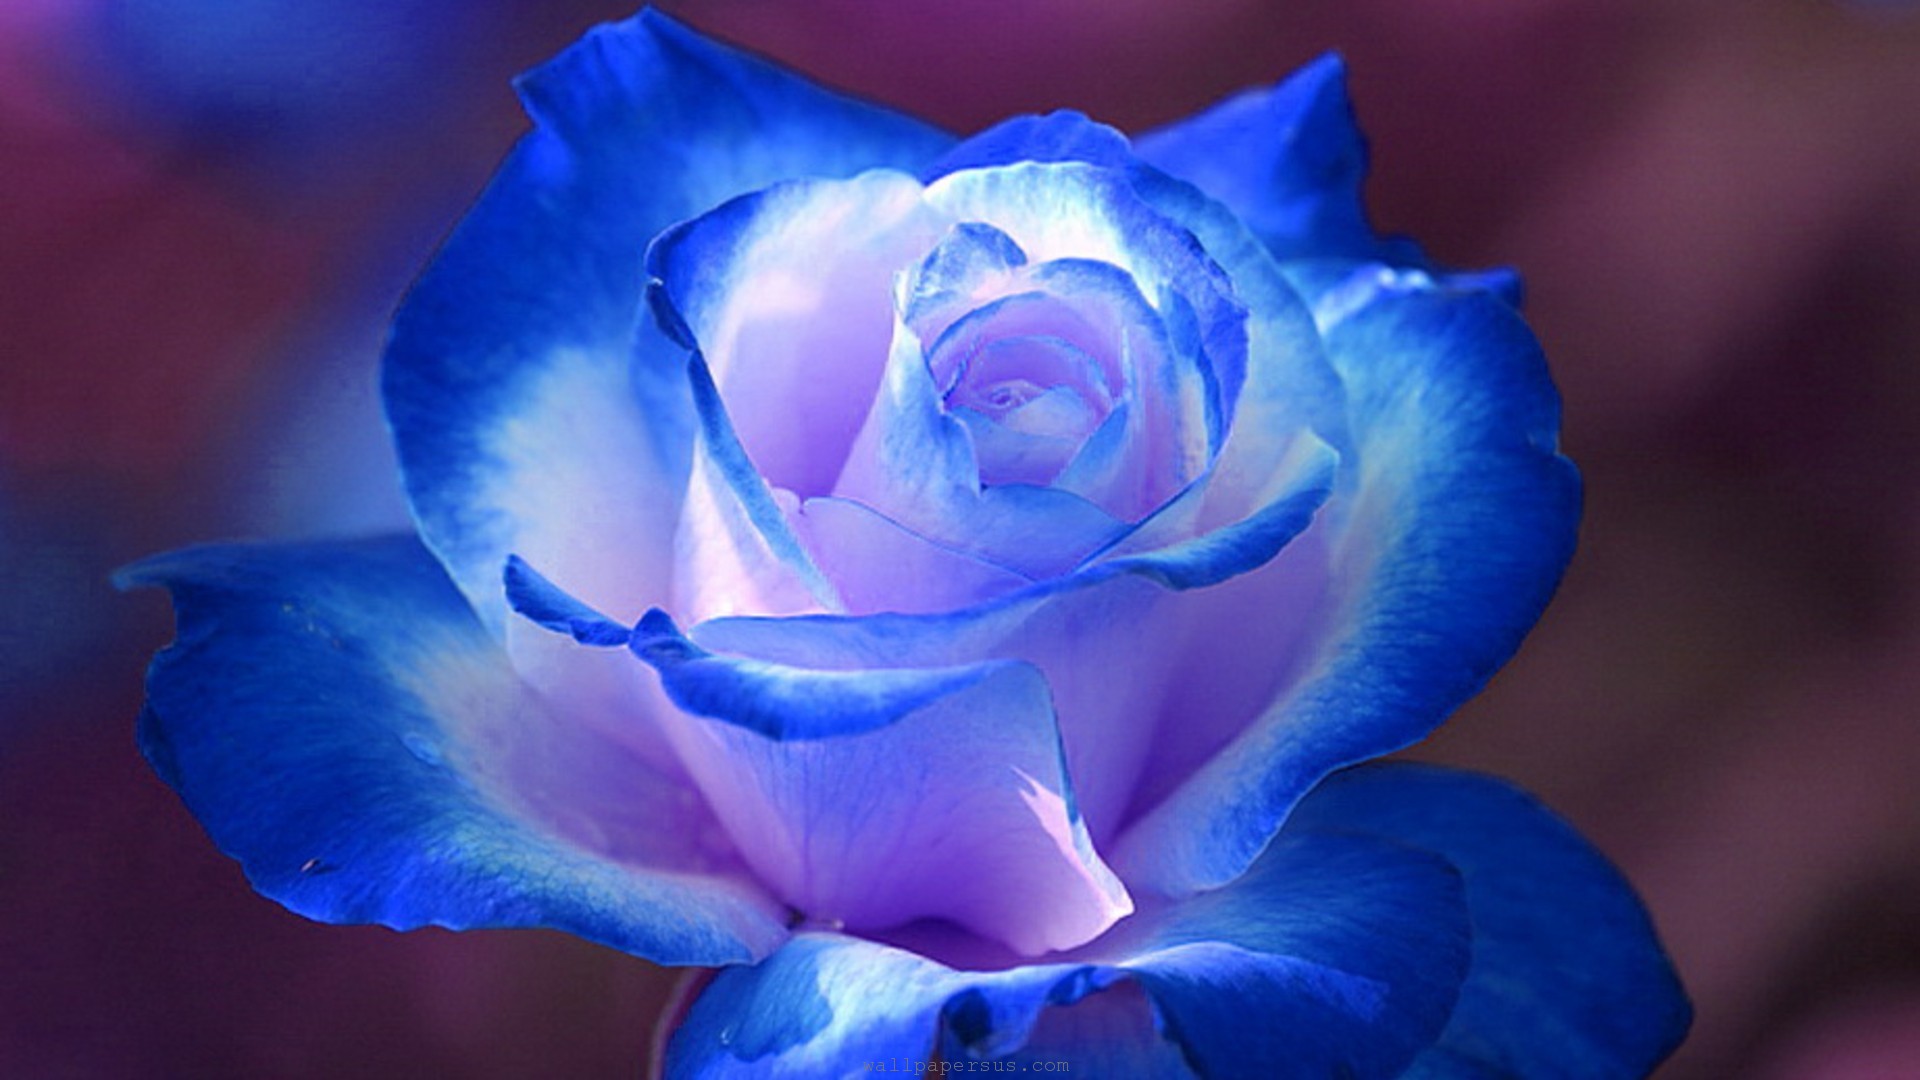 Blue Rose Wallpapers - Wallpaper, High Definition, High Quality, Widescreen